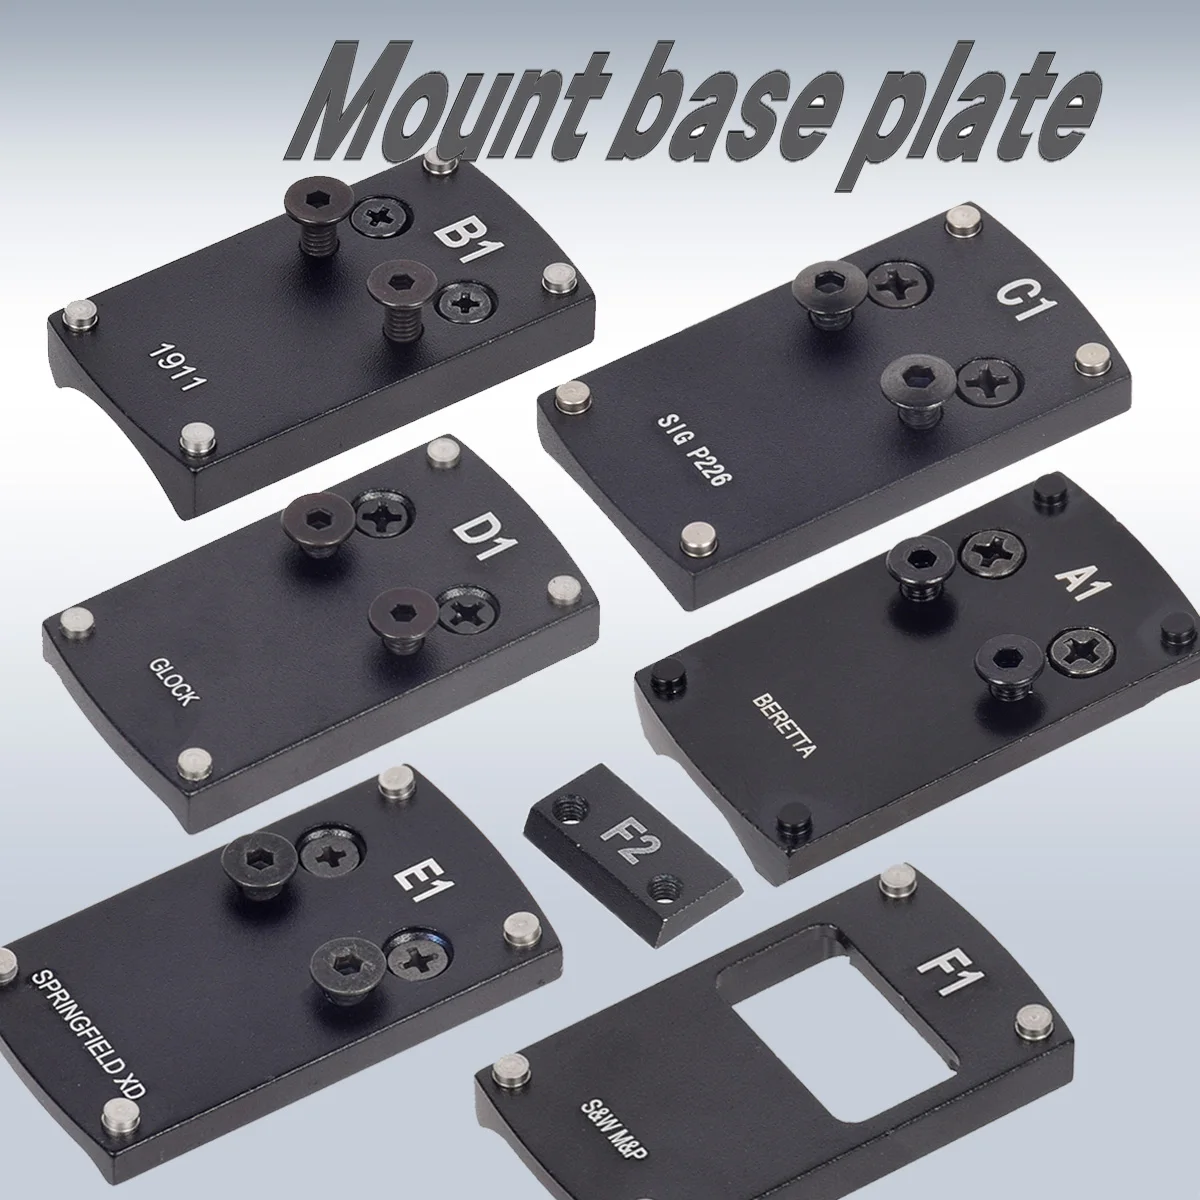 

Optics Pistol Sight Mount Base Low Profile Fit for Glock 1911 SW MP SIG P226 Springfield XD S&W M&P Red Dot Base Plate